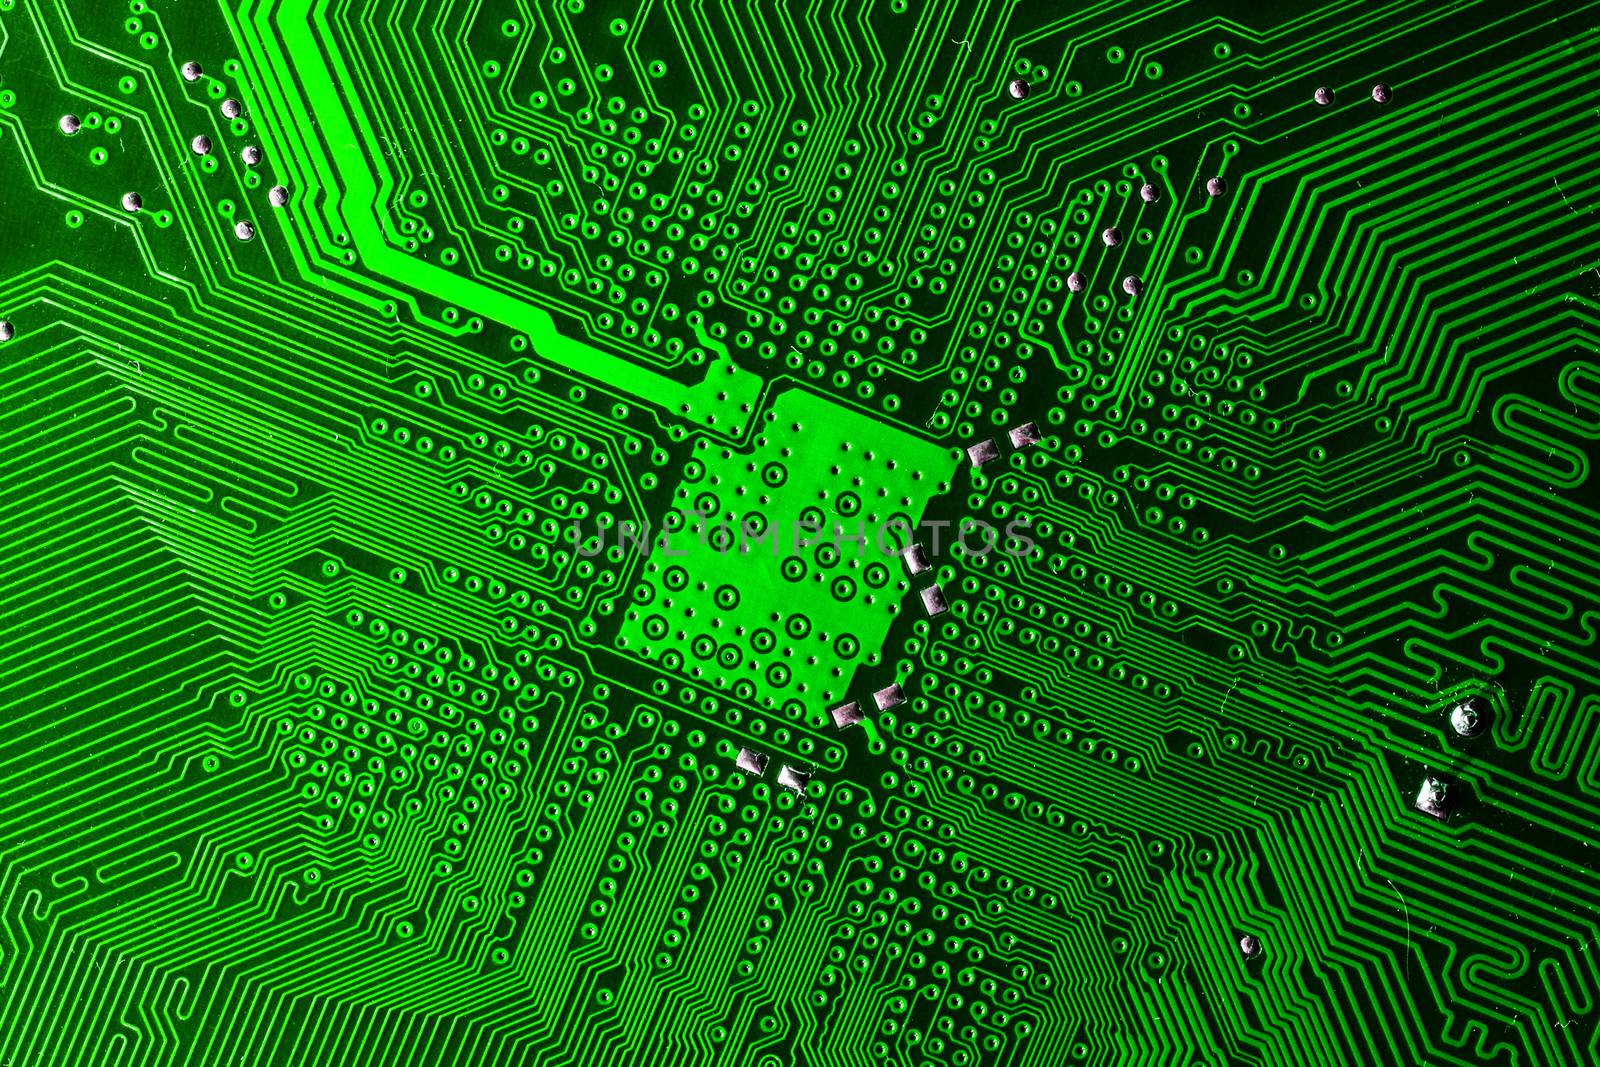 Close up photo of green printecd circuit board with solder points